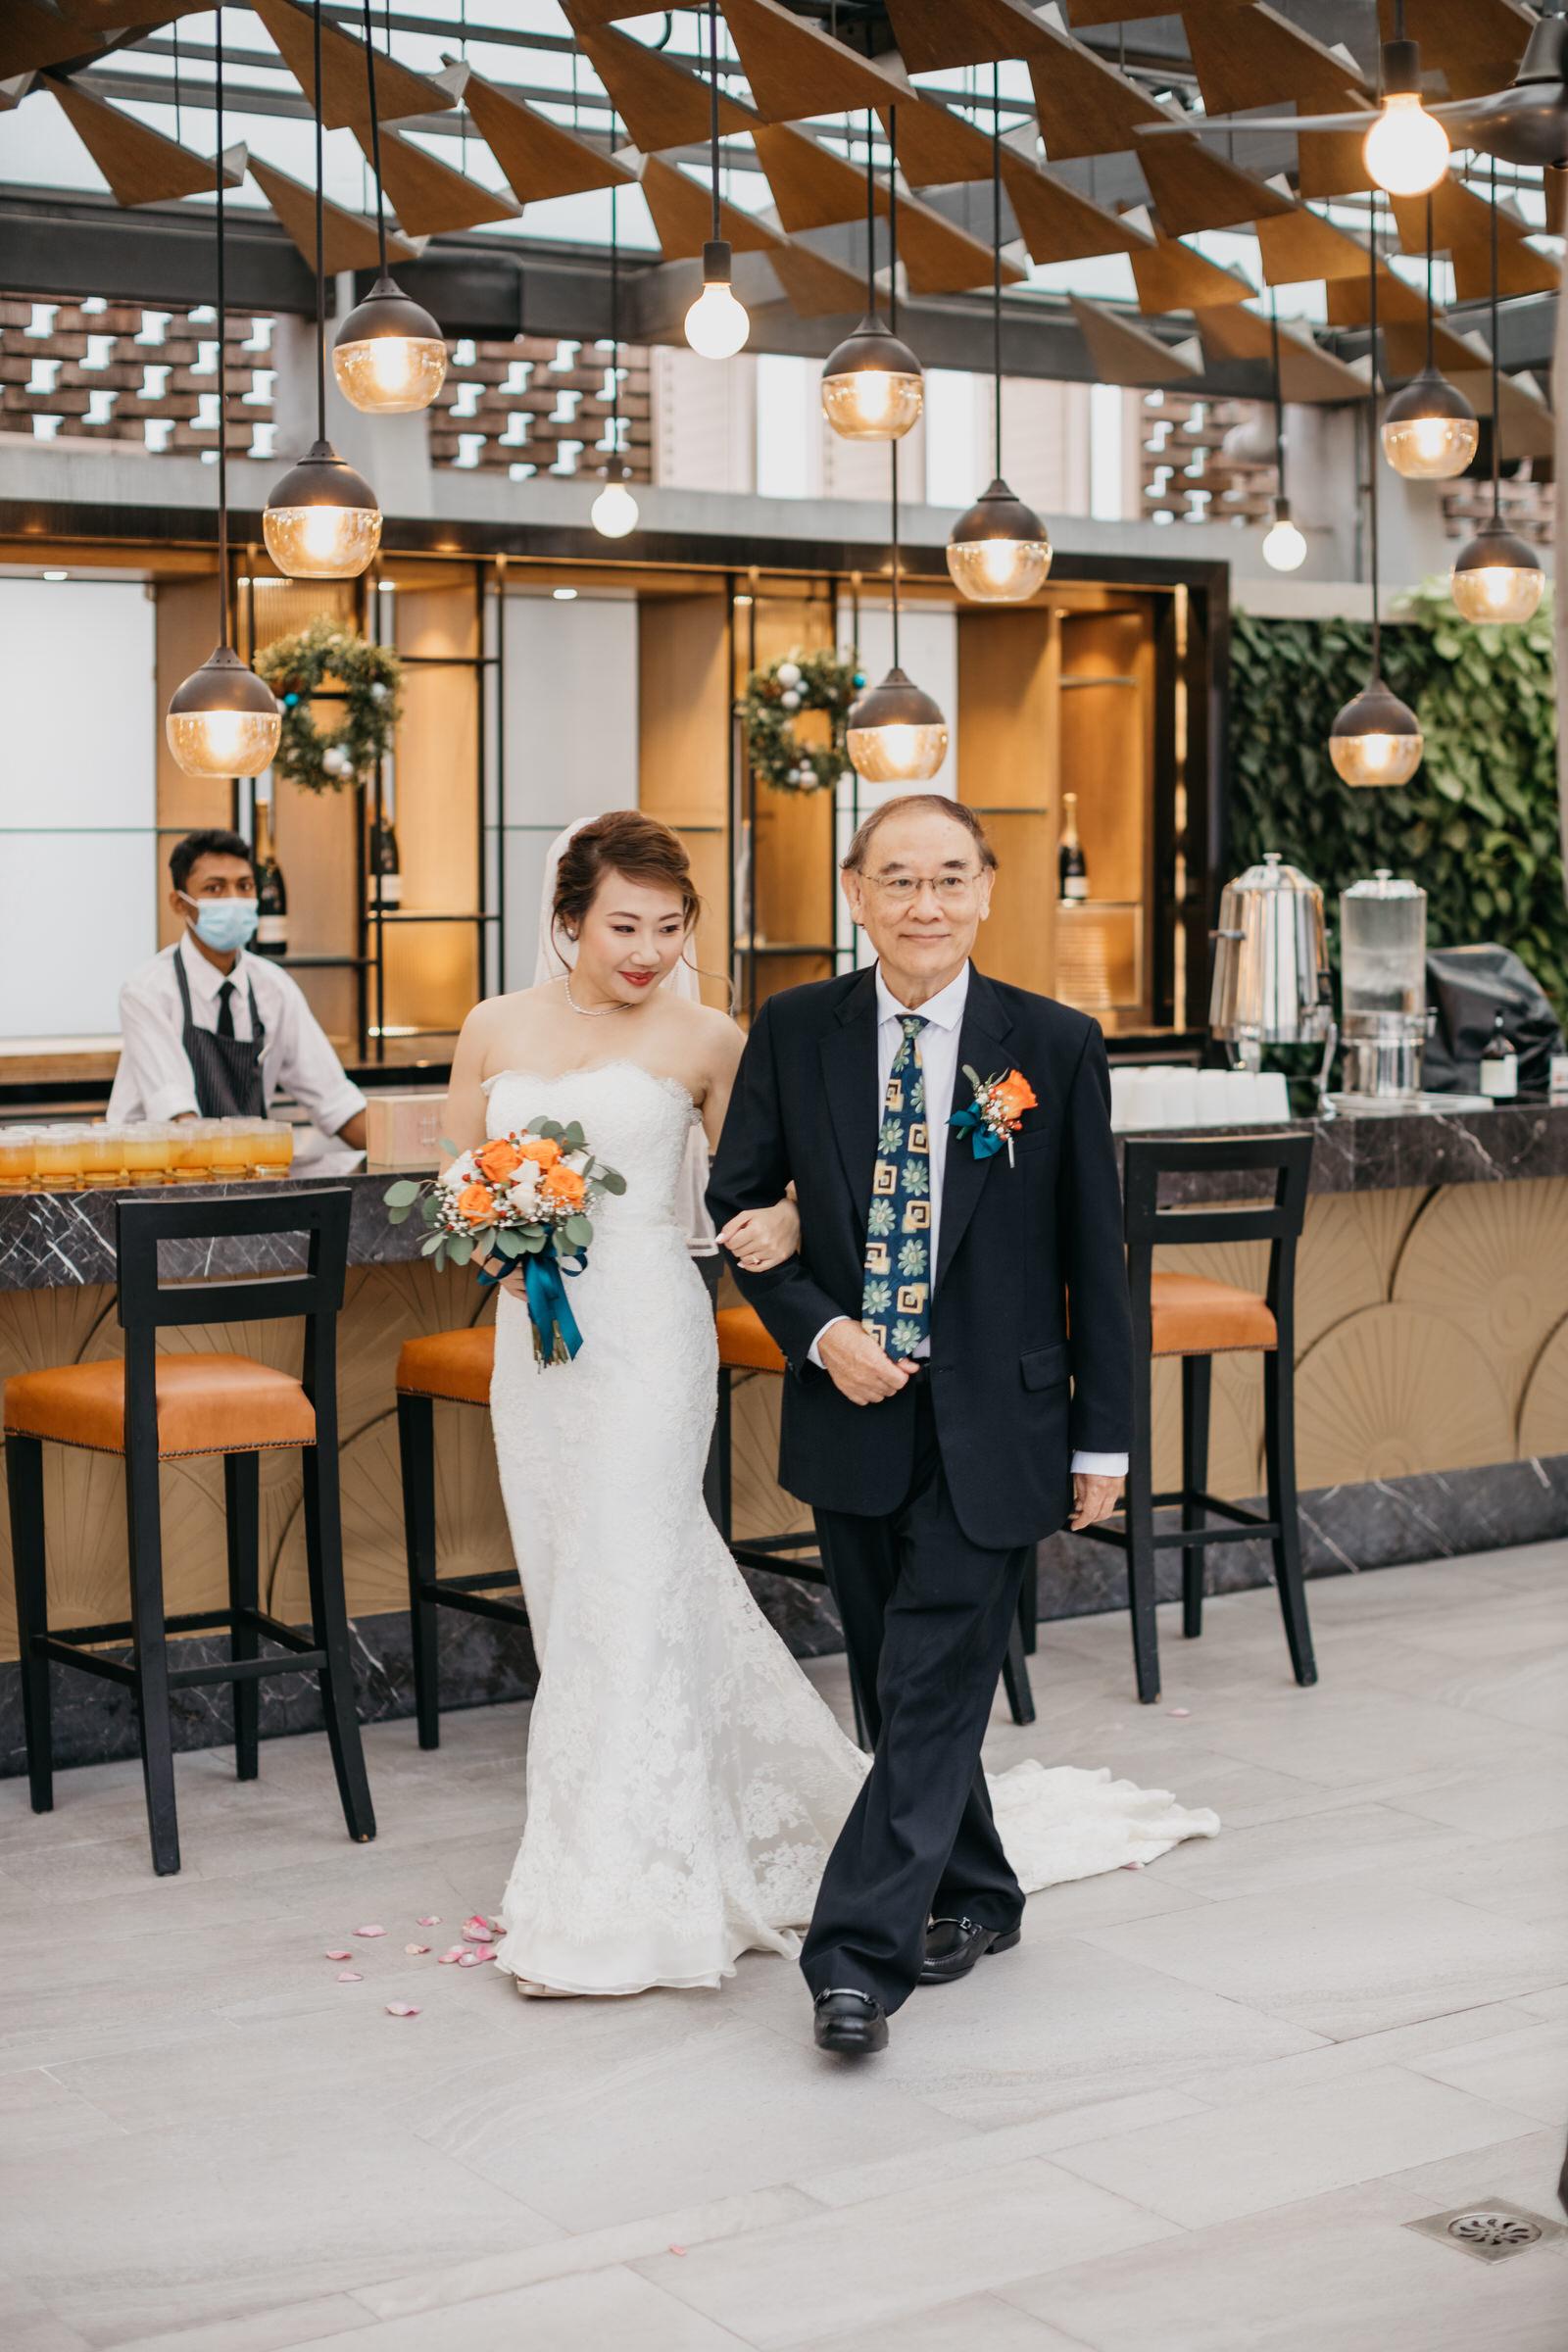 Father & Bride March In Boho Deco Rooftop Poolside Wedding at Hotel Stripes Kuala Lumpur MCO2.0 Cliff Choong Photography Malaysia Covid19 ROM 